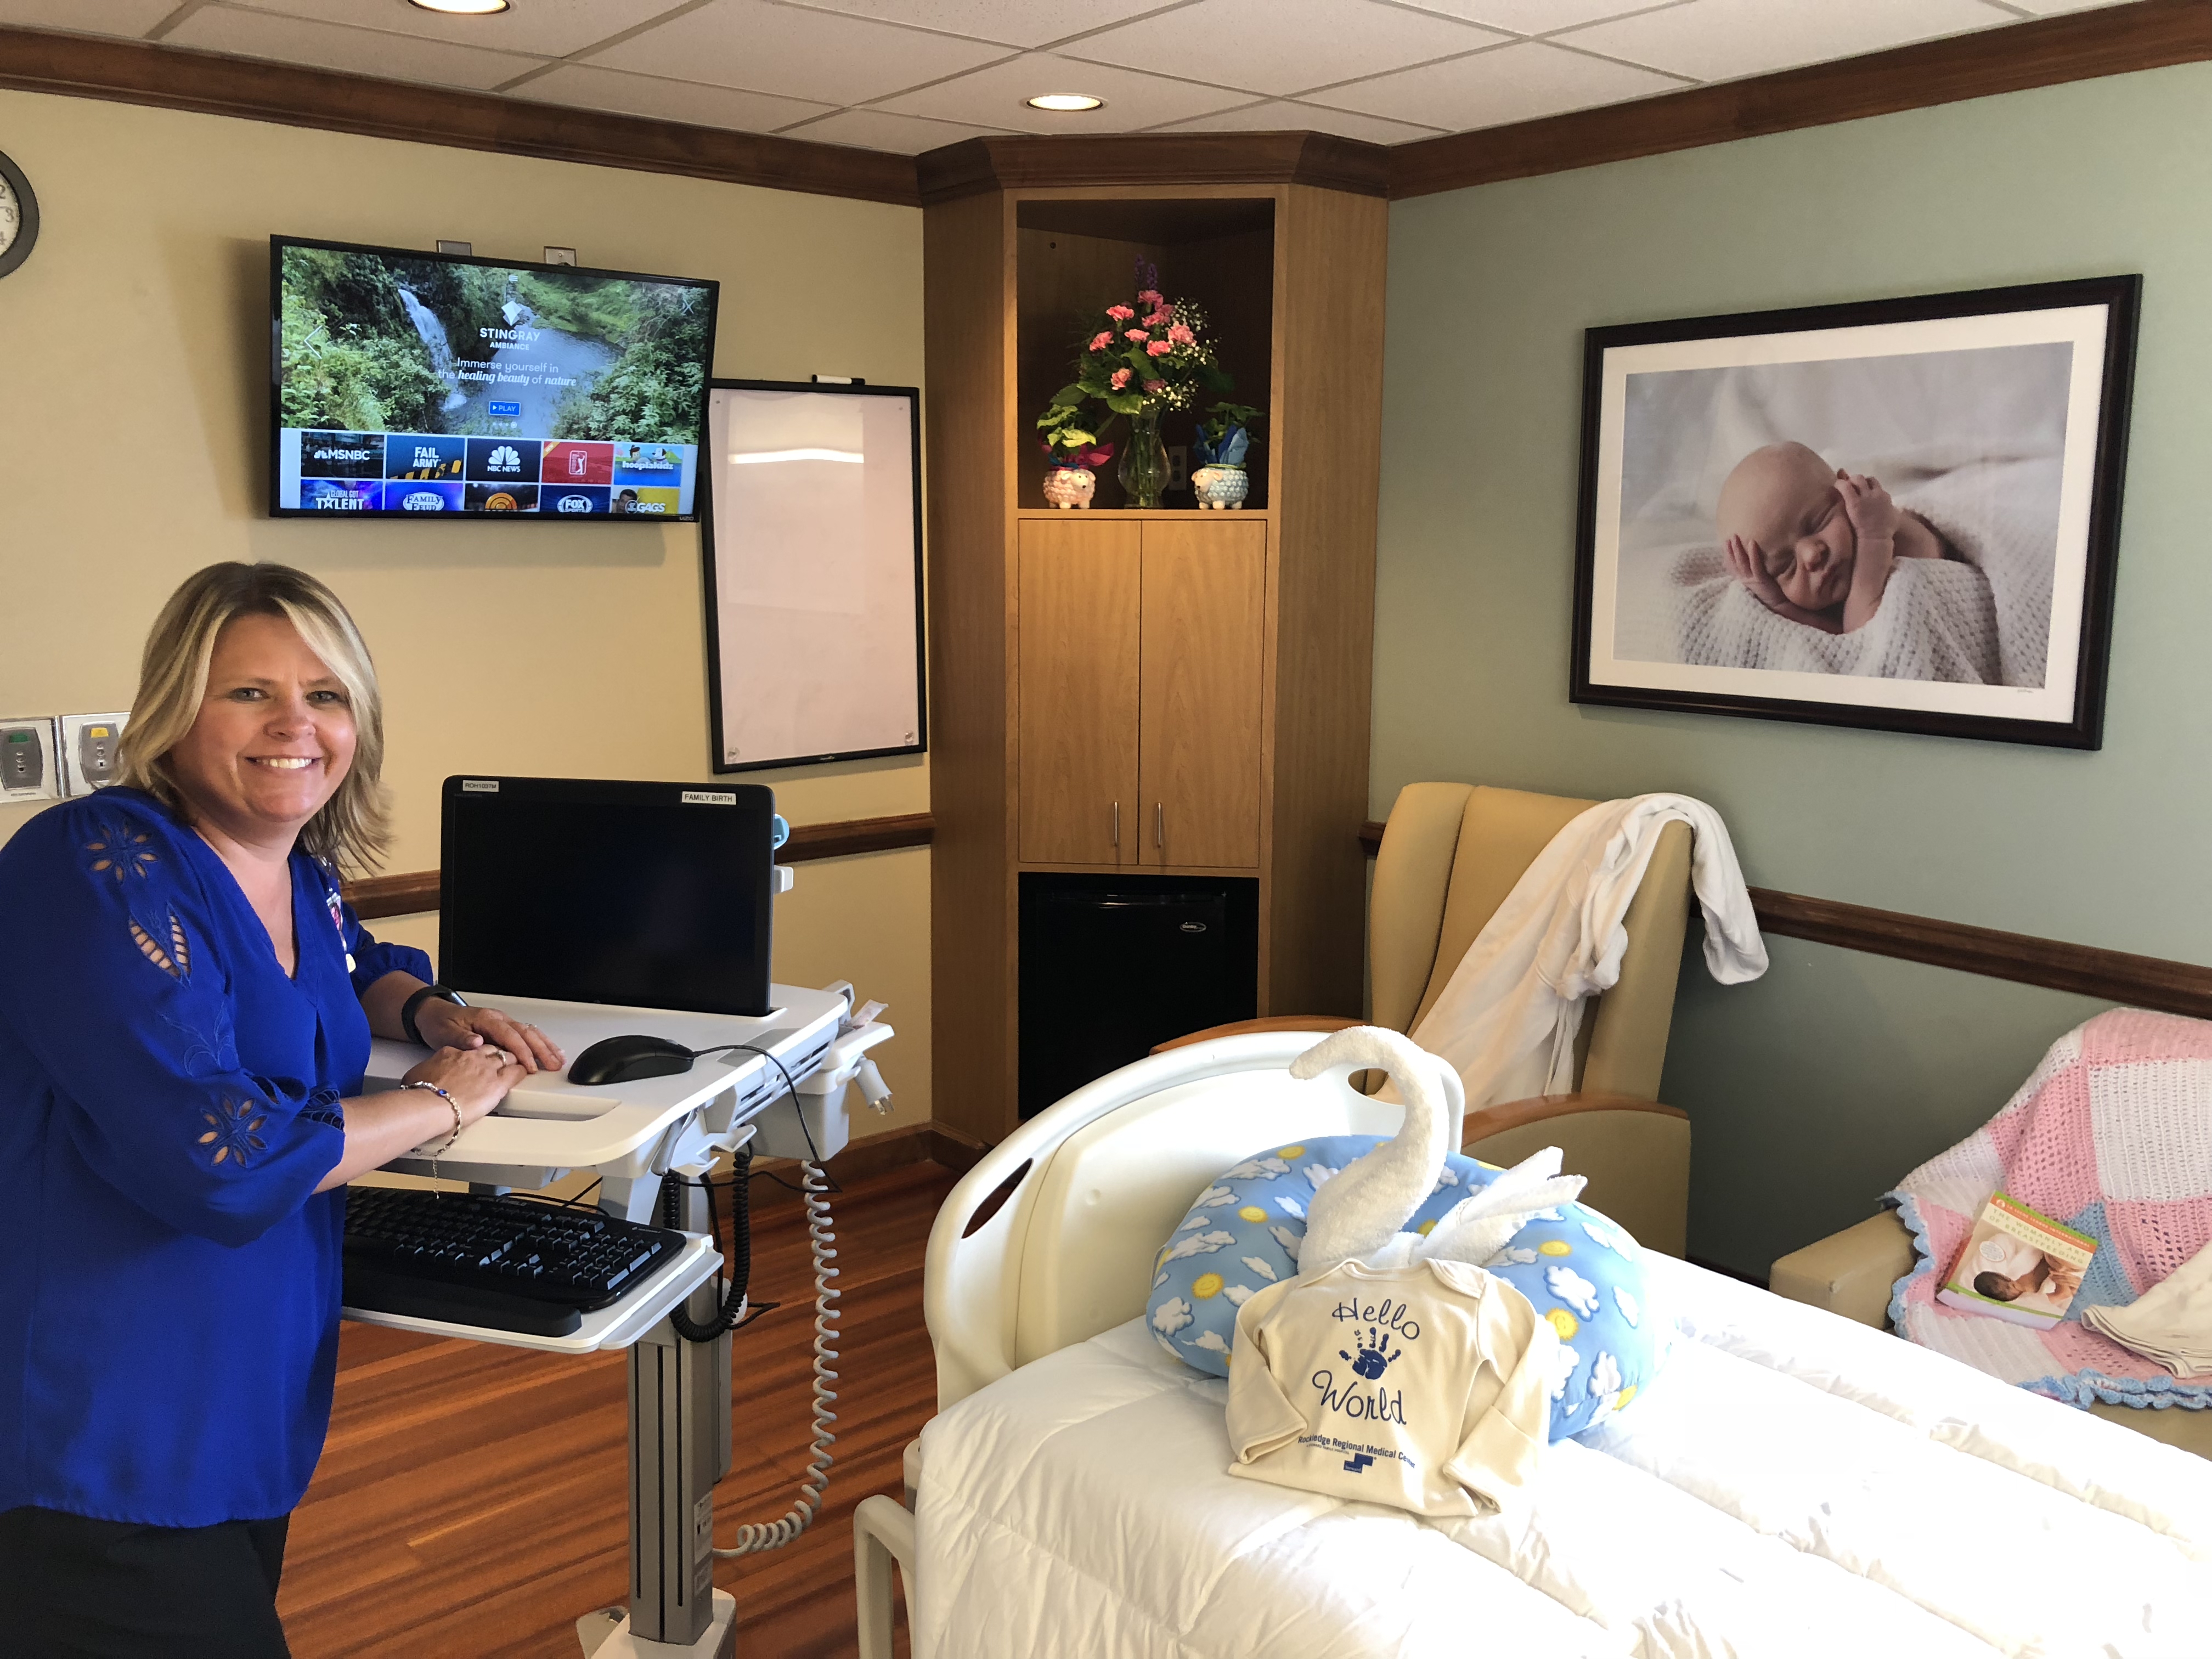 Kristy Brackett, BSN, RN, director of maternal child services at Rockledge Regional Medical Center, is all smiles in the freshly renovated suites at Steward Family Birthplace. The hospital has launched its Signature Maternity program with numerous enhancements that include complimentary plush bathrobes, upgraded linens and towels, natural and organic bath products, and a pregnancy concierge service.